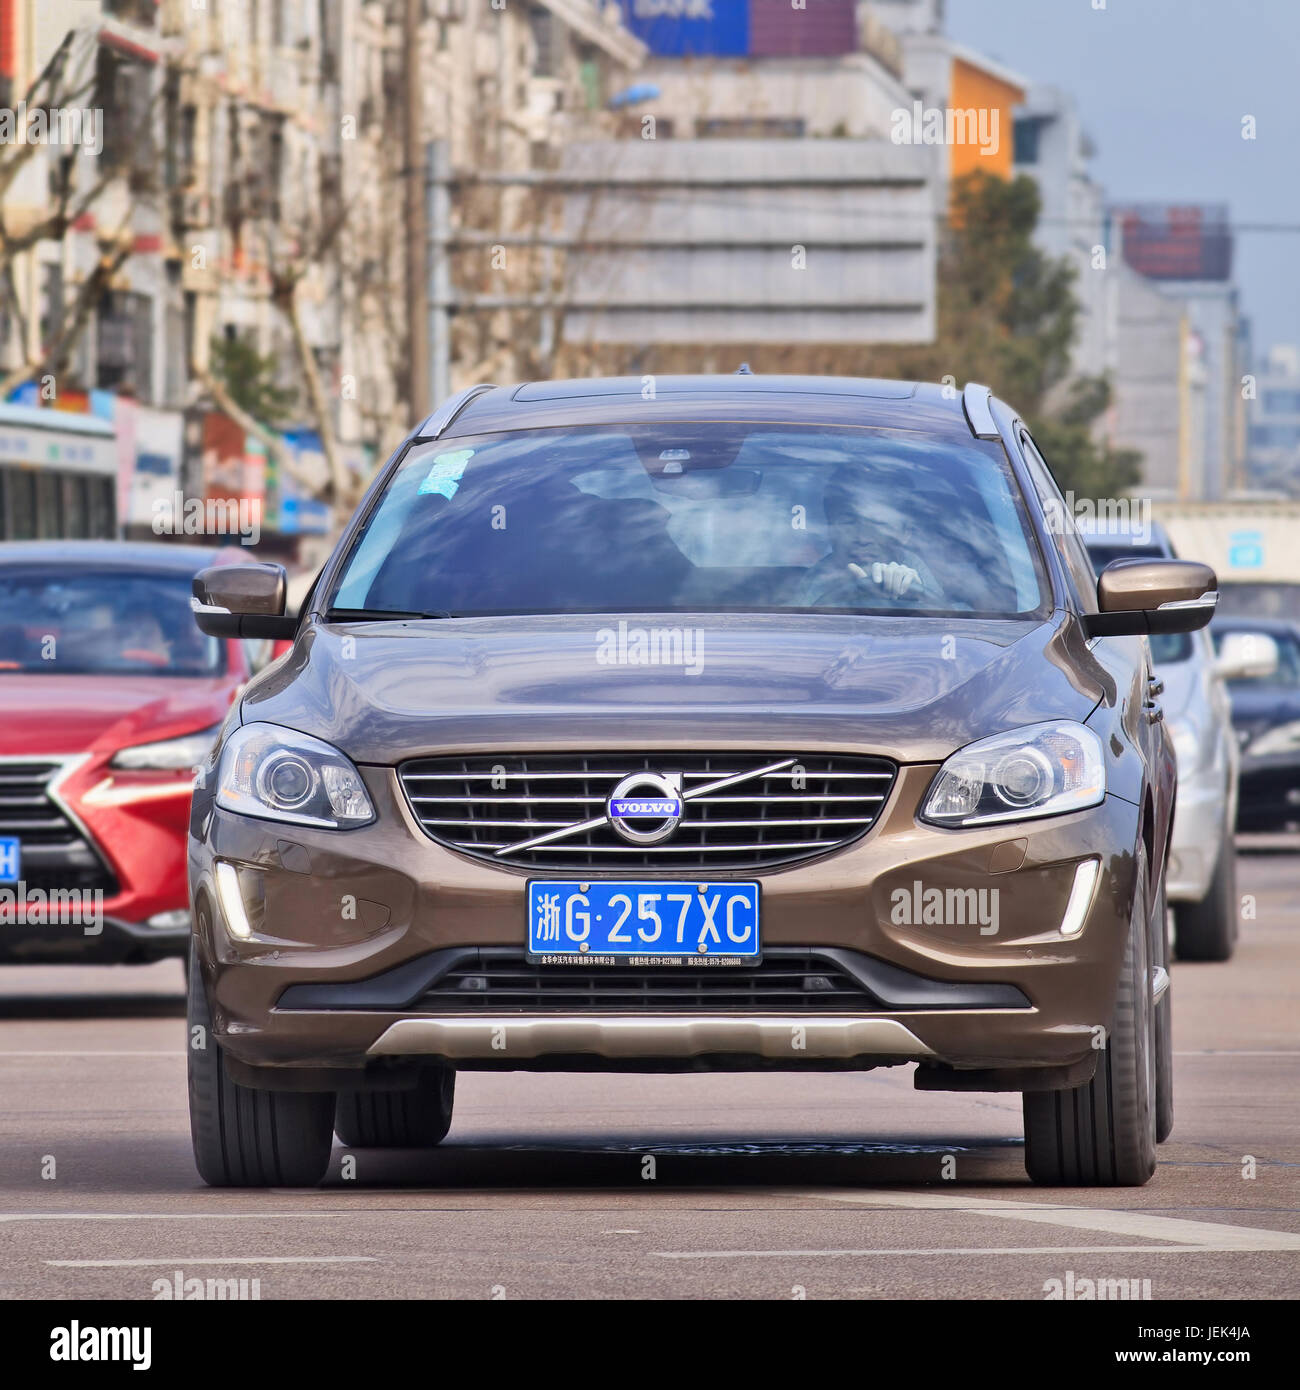 Volvo XC60 AWD front view. The Swedish manufacturer, bought by Zhejiang Geely in 2010, is beginning to reap benefits of five years model development. Stock Photo